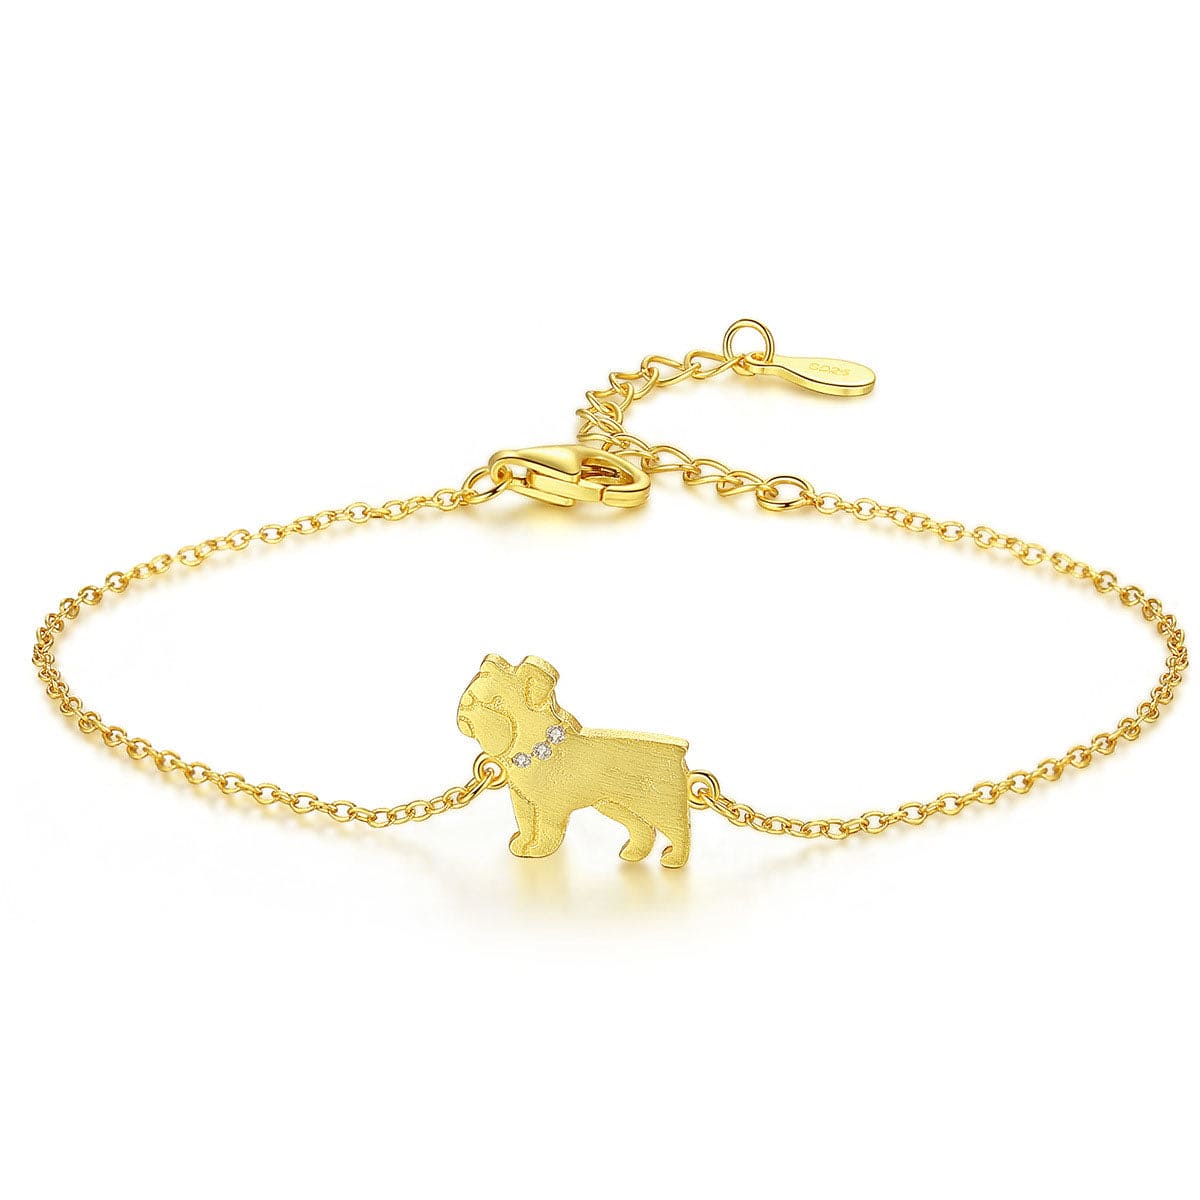 Cute Pug Dog With Gemstone Collar 18K Gold Plated Sterling Silver Bracelet